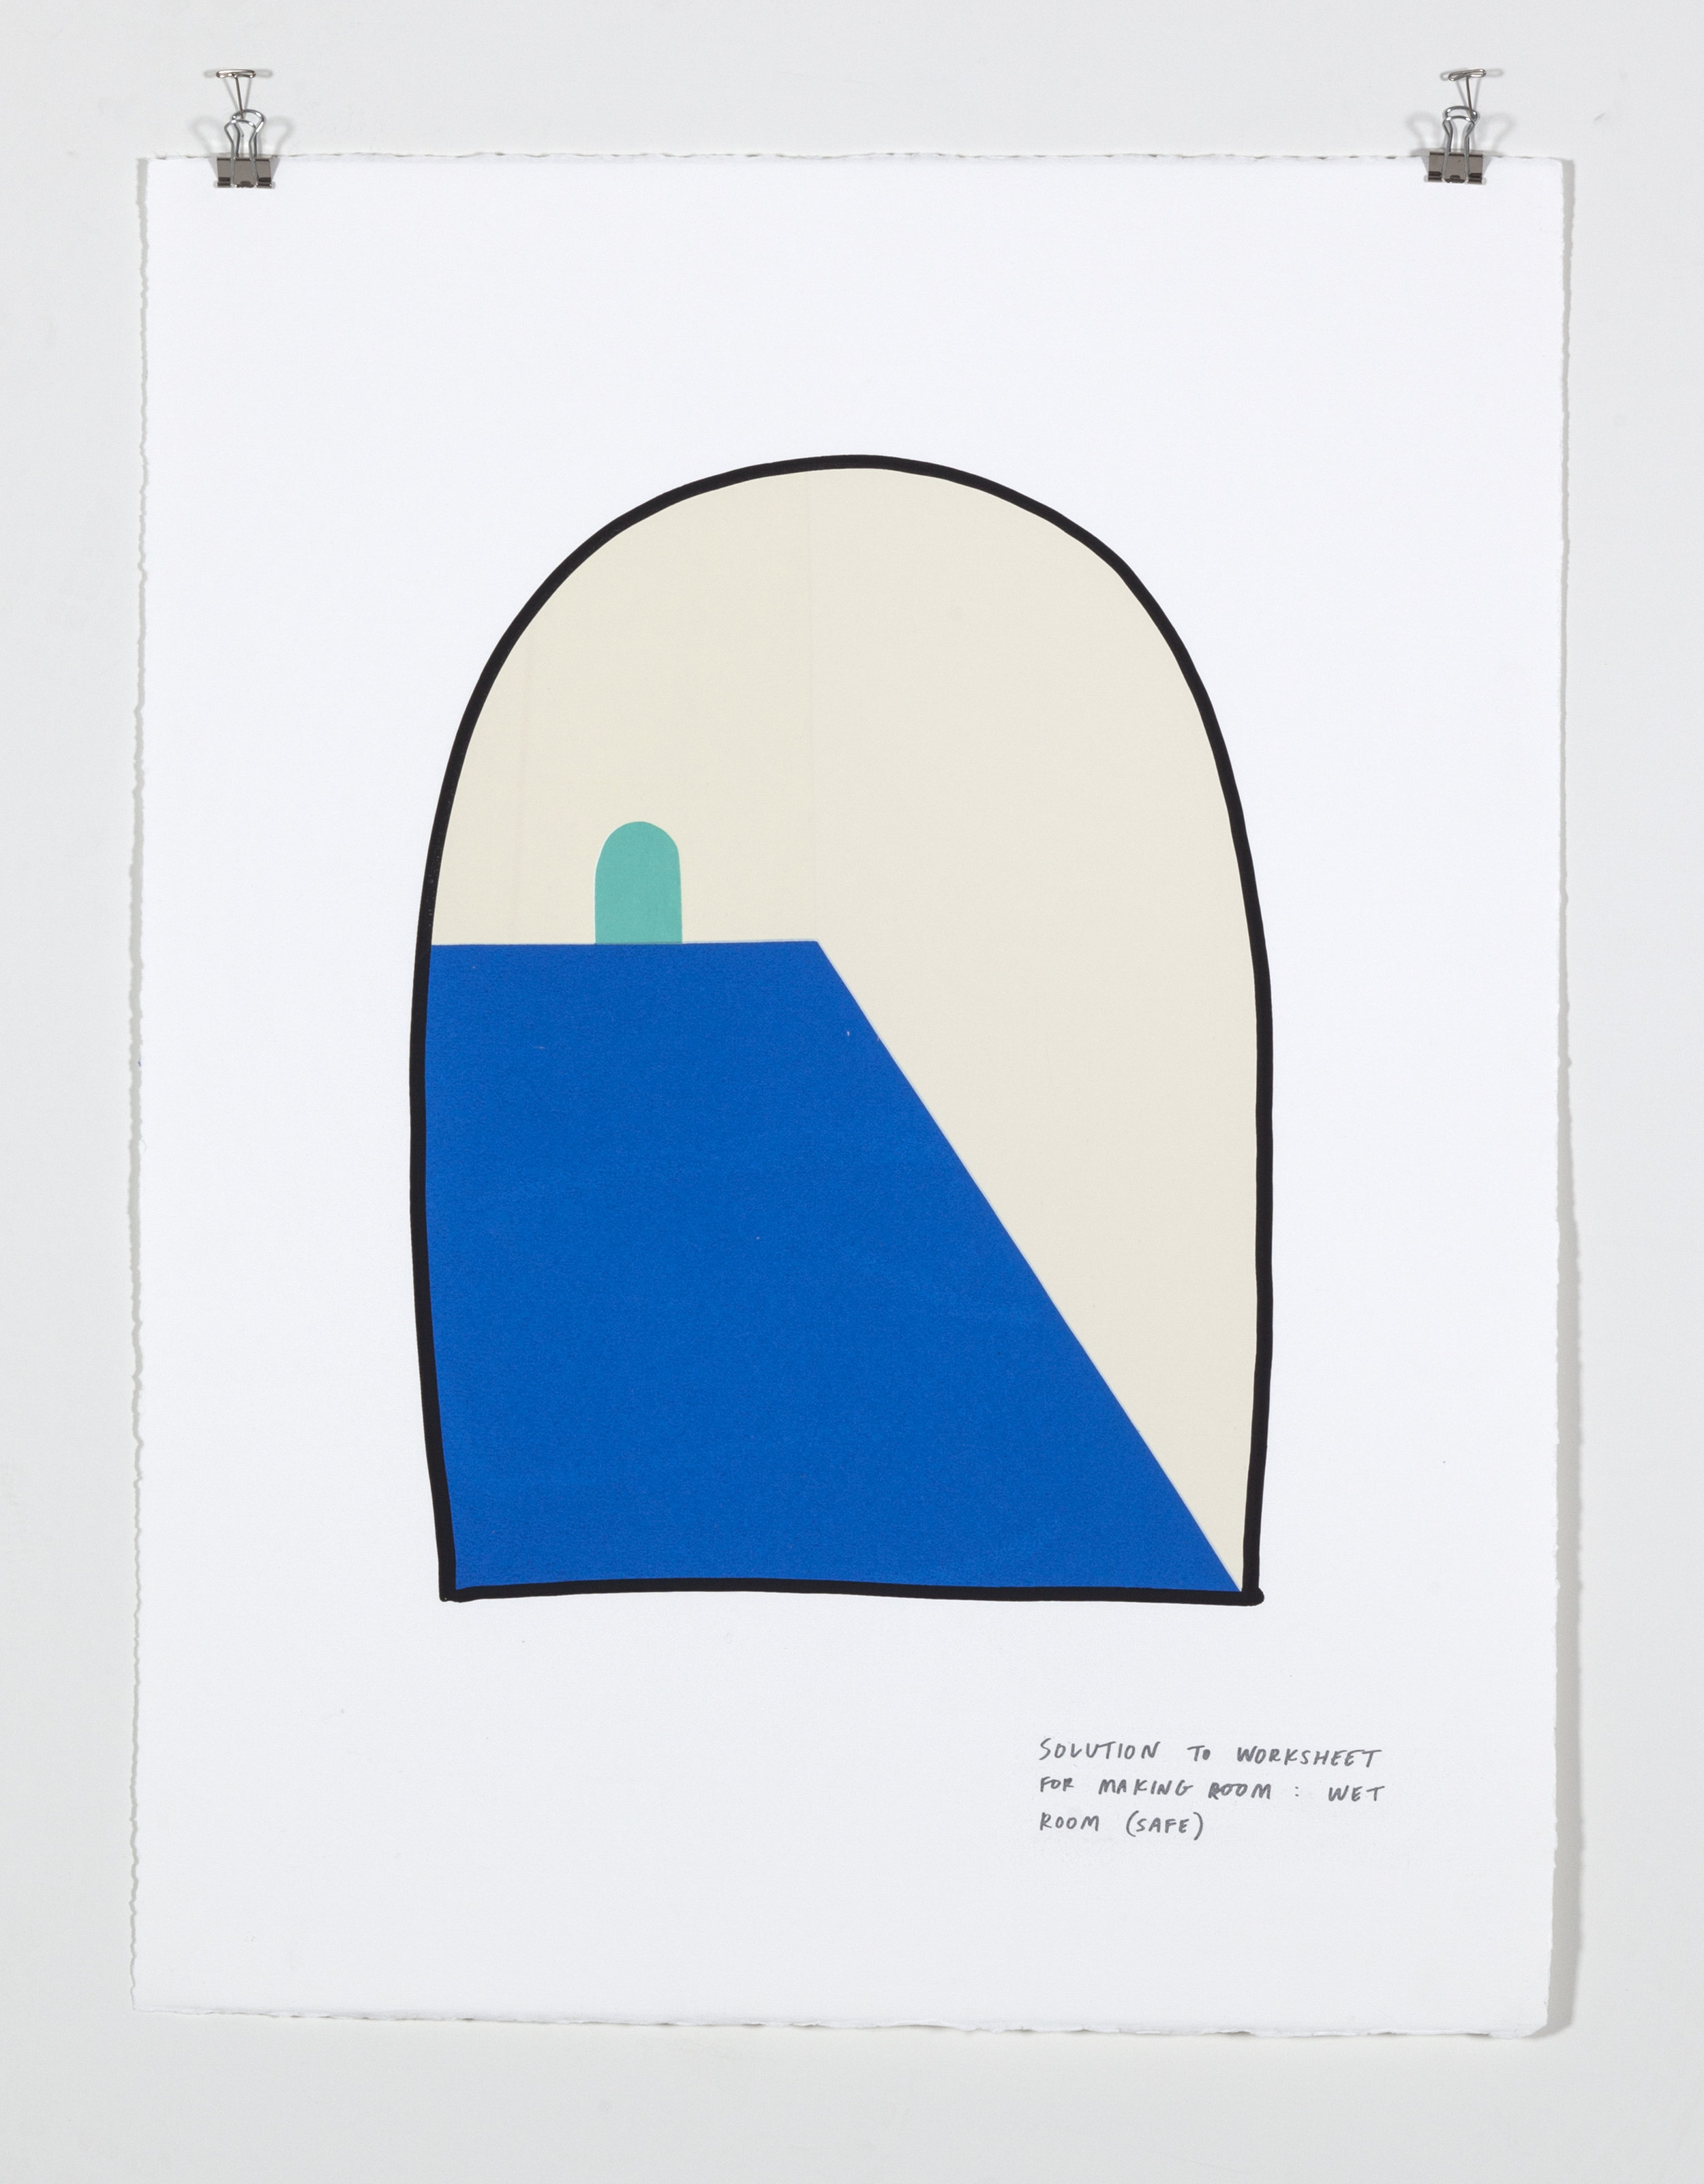    Solution to Worksheet for Making Room: Wet Room (Safe),  2018  Five color silkscreen print on paper 19 7/8 x 25 7/8 inches 